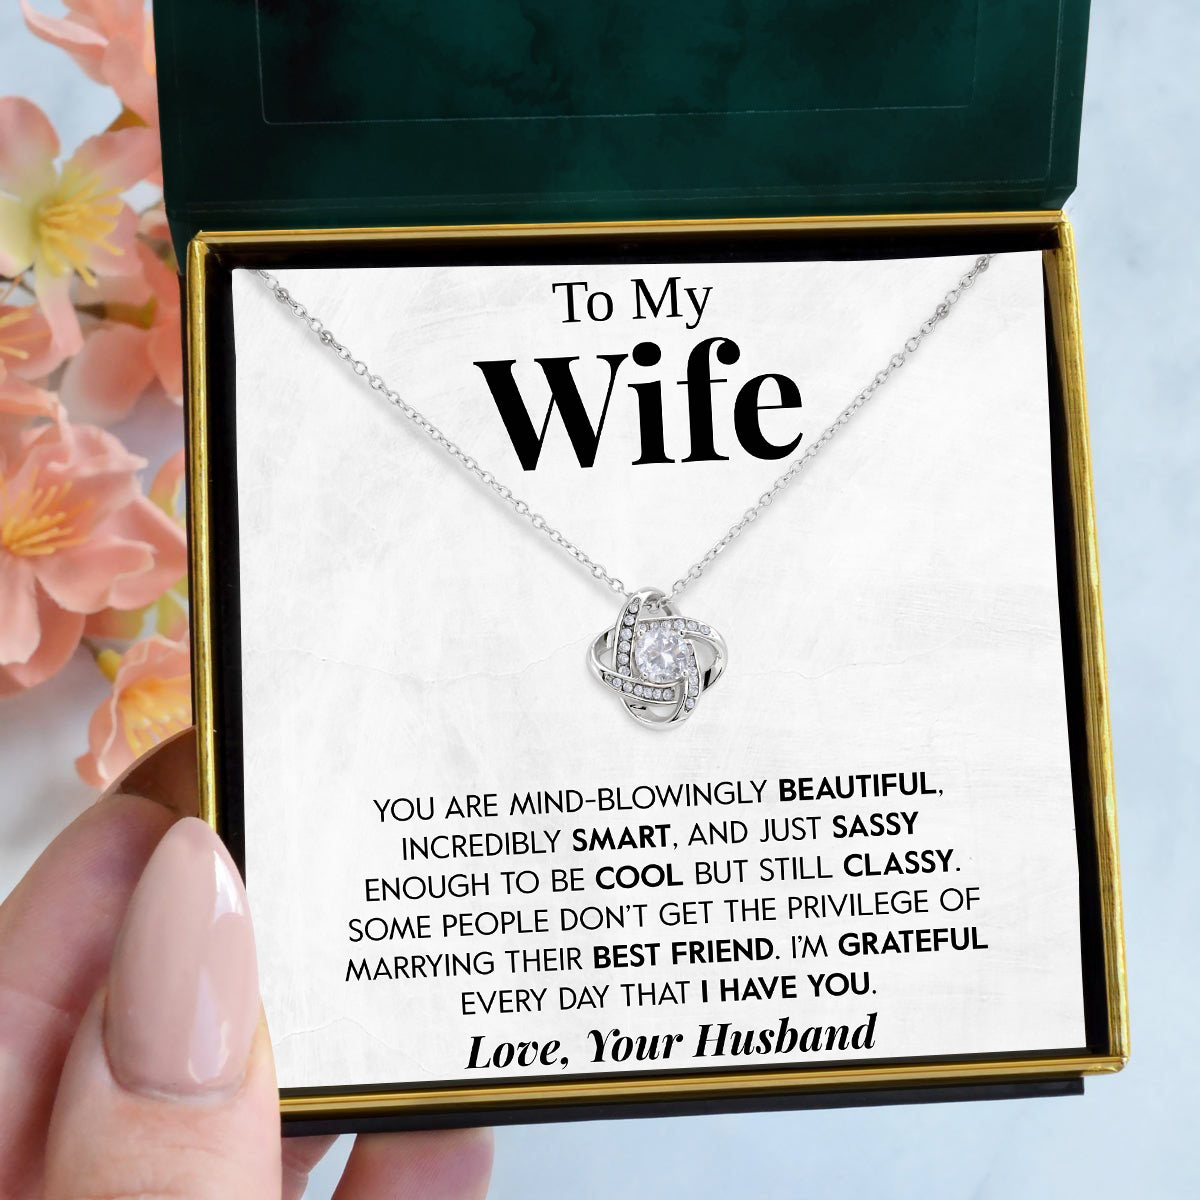 To My Wife | "I Have You" | Love Knot Necklace